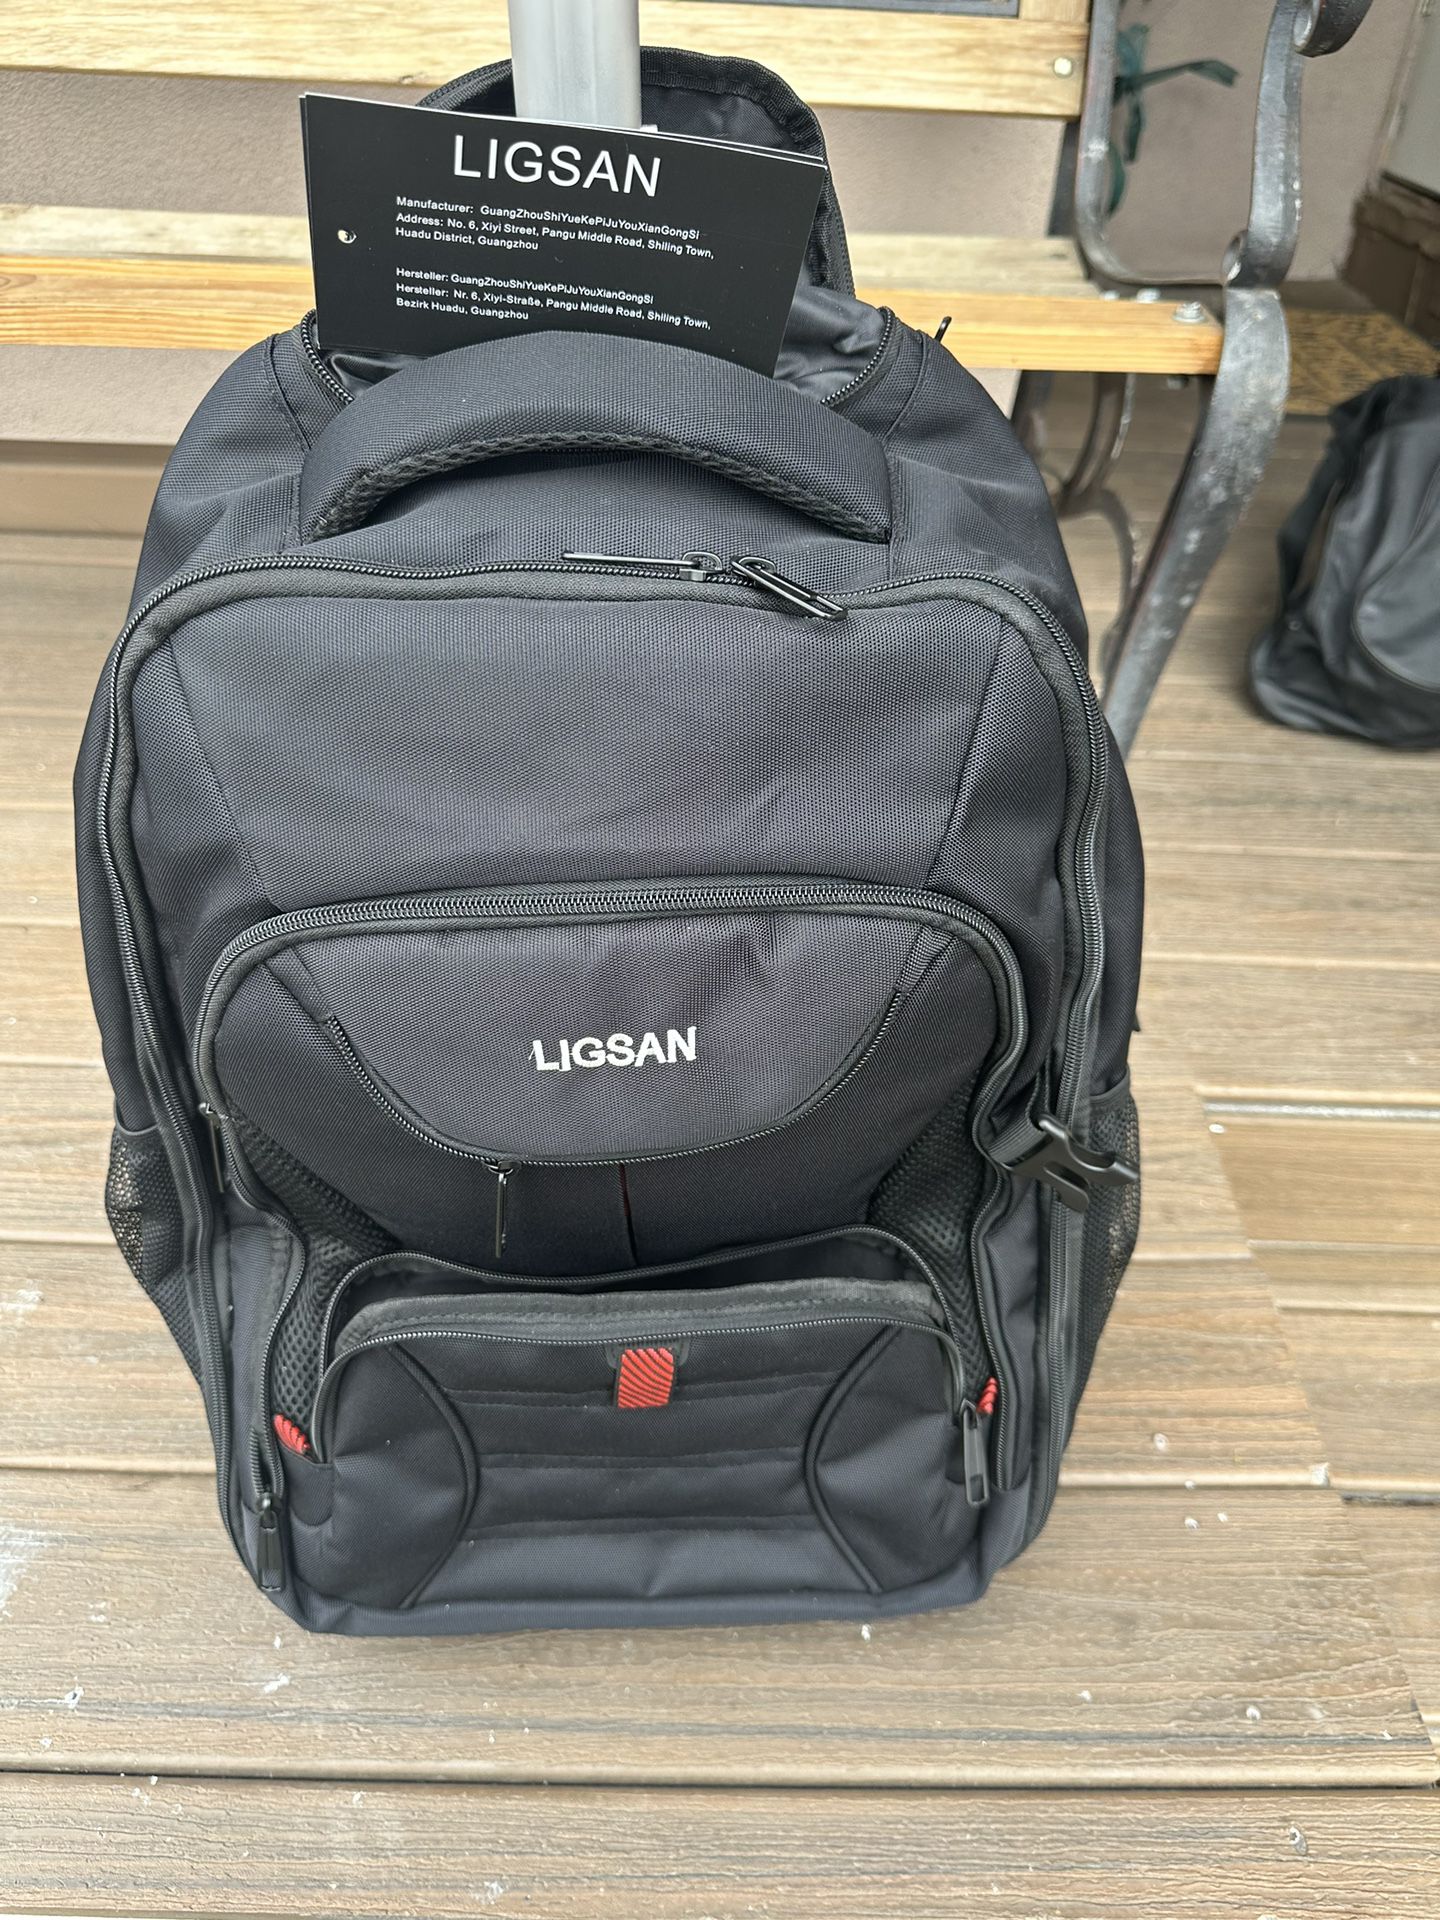 New Ligsan Rolling Travel Backpack